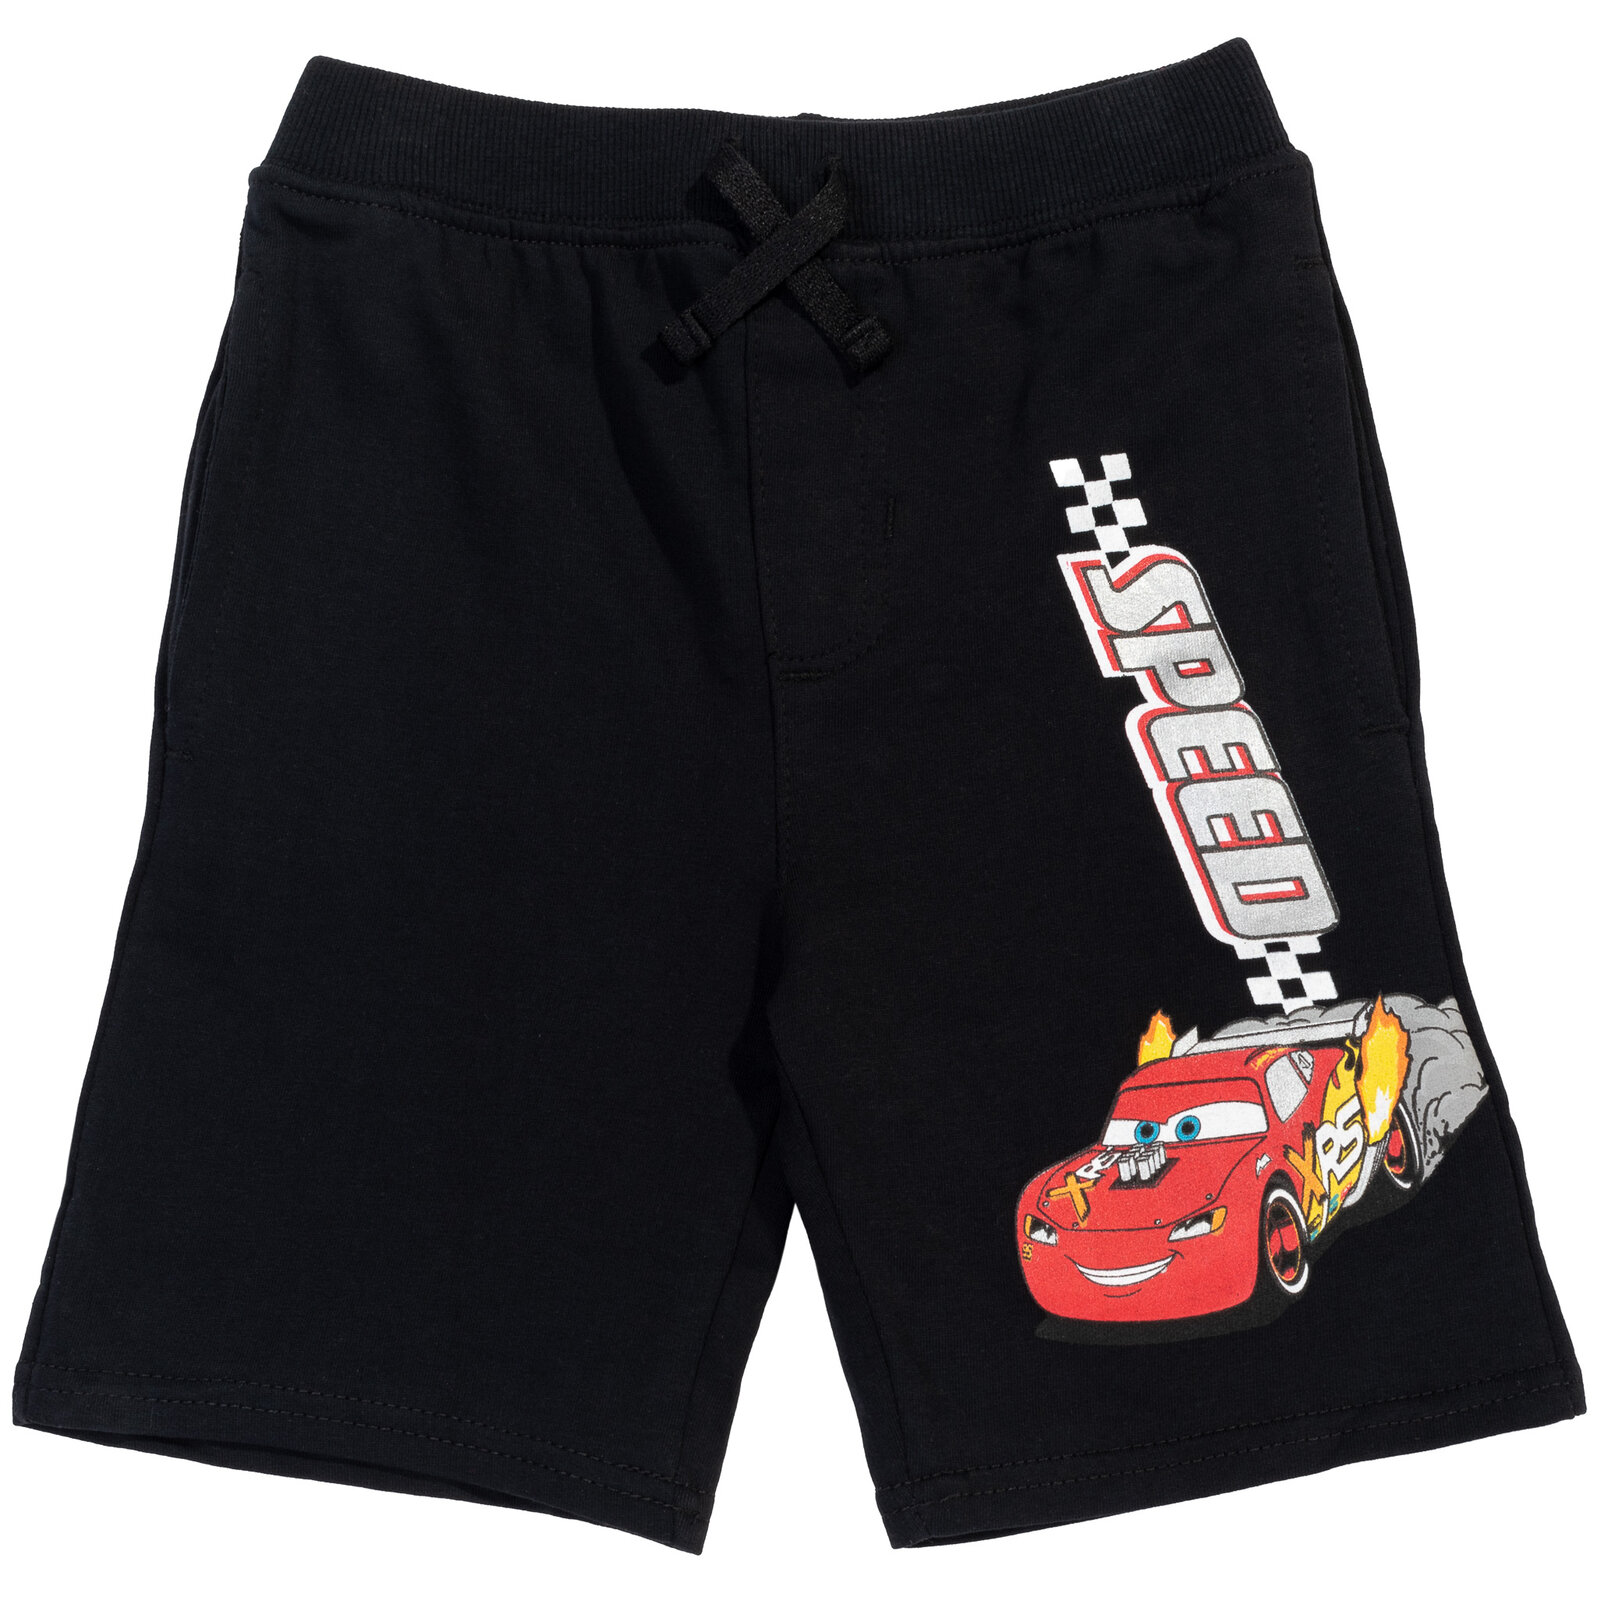 Disney Pixar Cars Lightning McQueen Toddler Boys French Terry 2 Pack Shorts Toddler to Little Kid - image 2 of 5